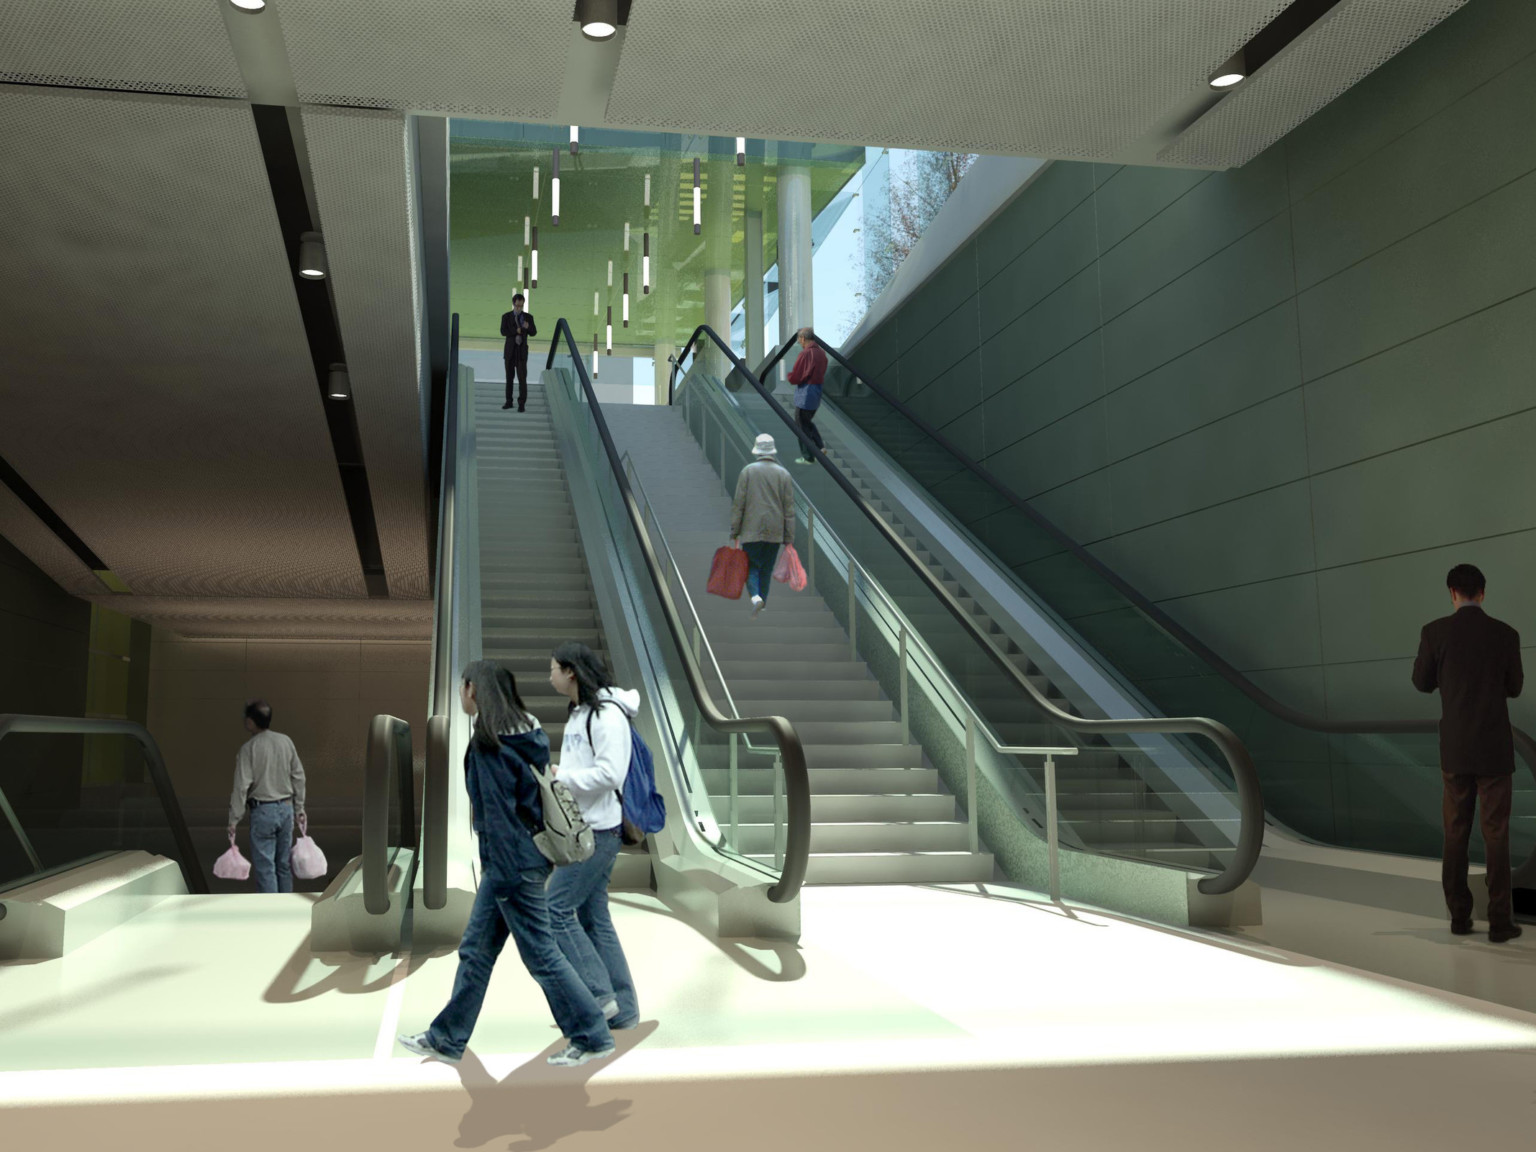 Landing with escalators to left and right. Grey panel walls with textural ceiling panels, above, with lights recessed between